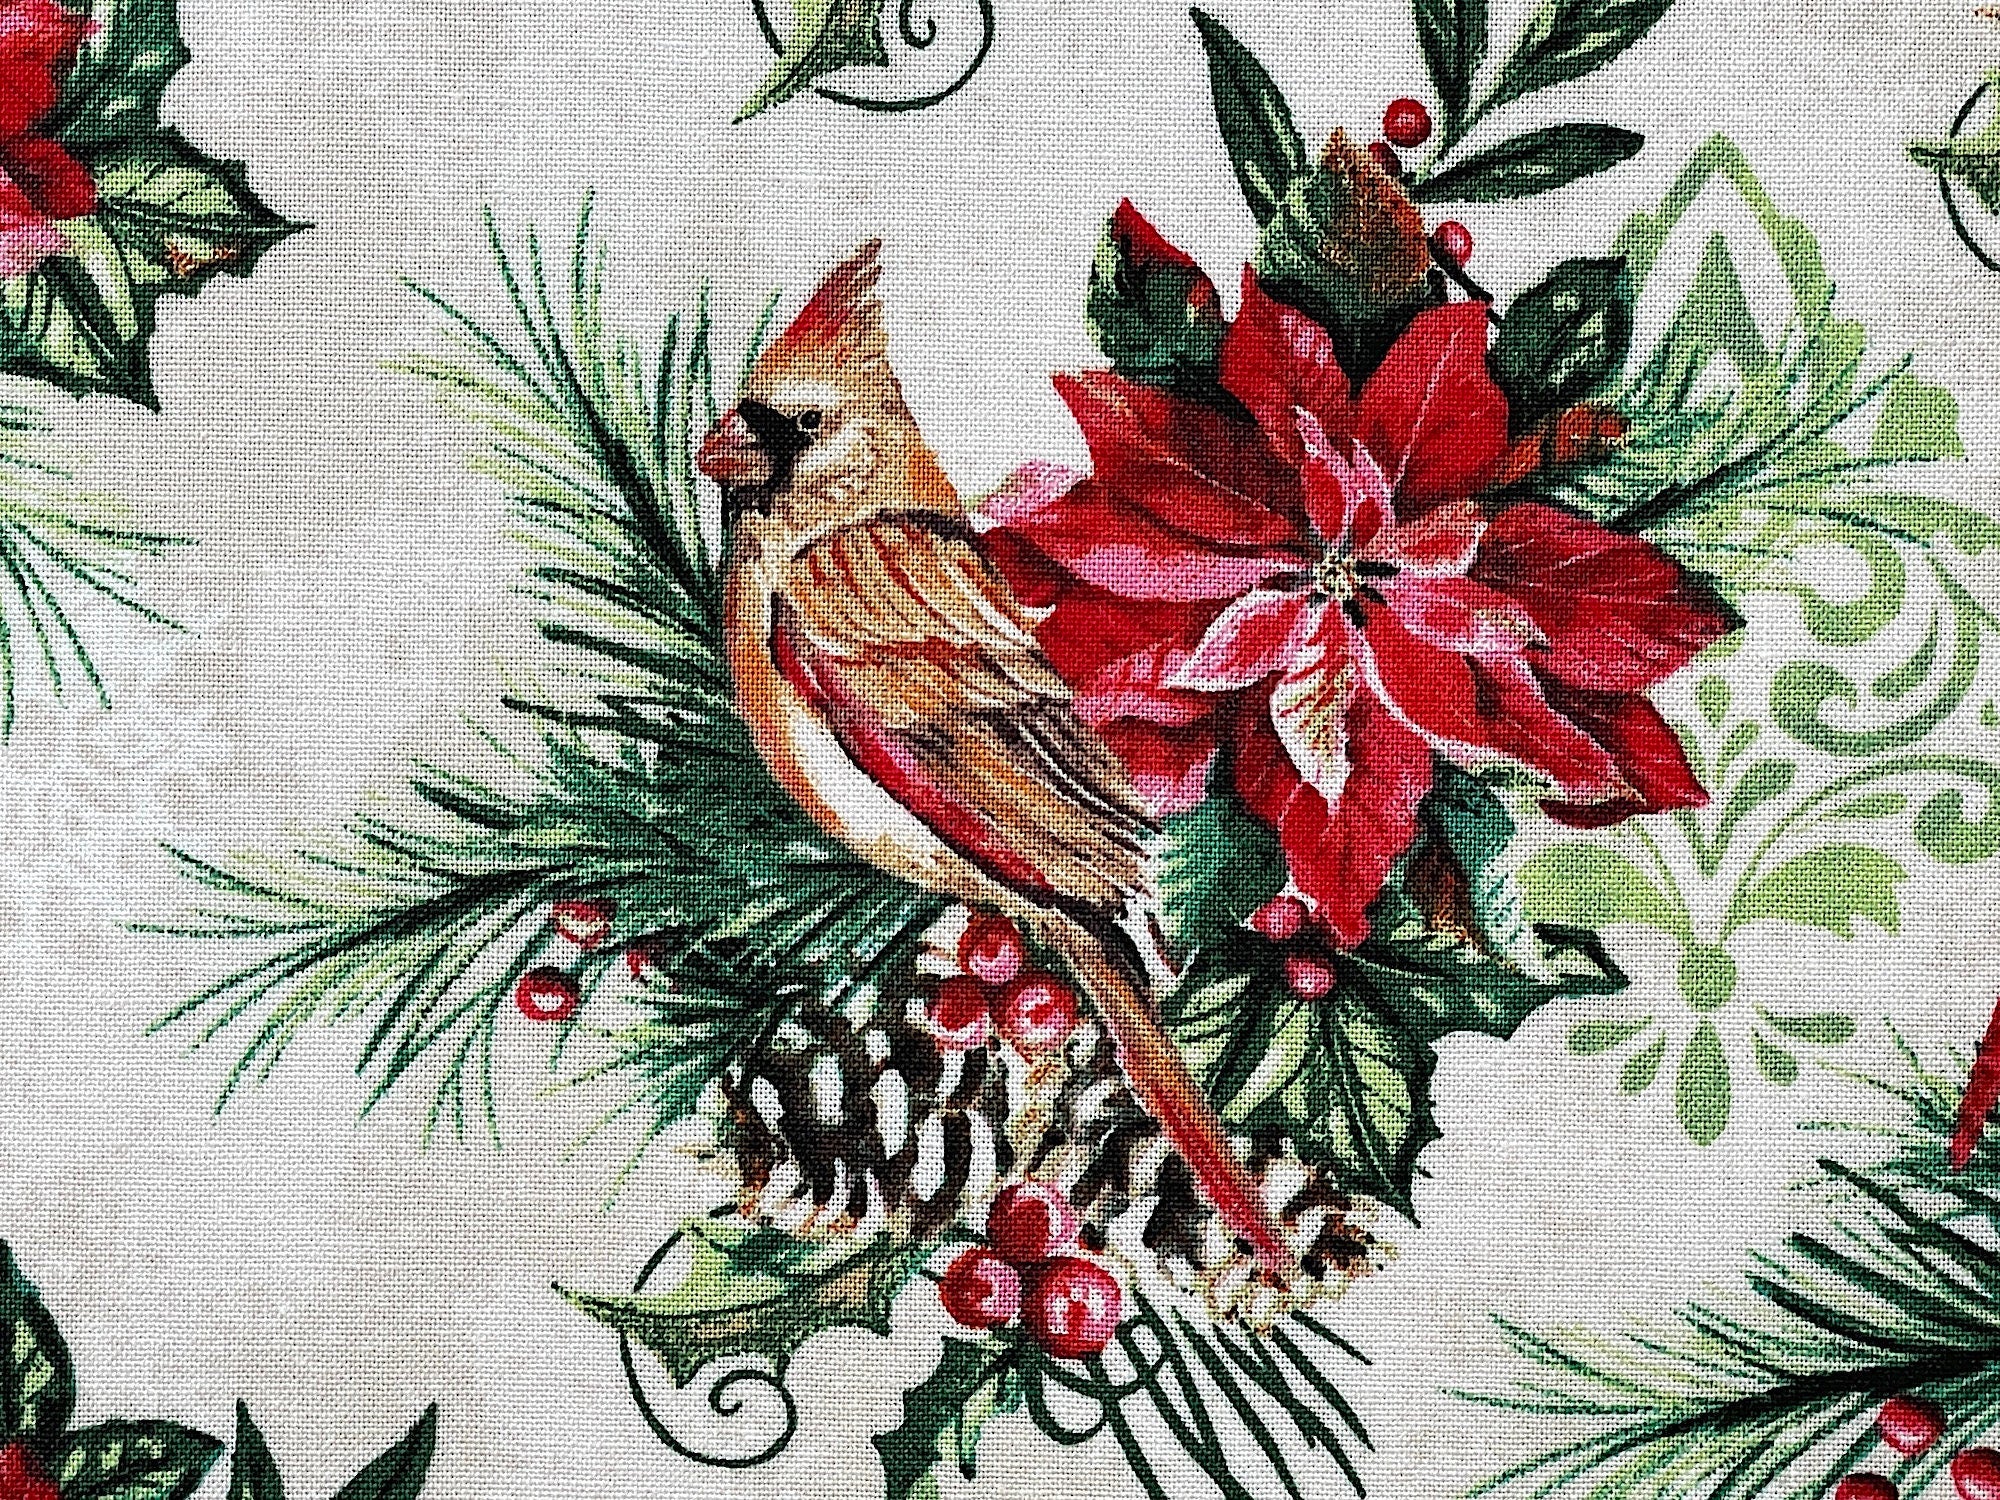 Close up of a bird sitting on a branch with  a poinsettia, pine cone, berries, leaves and more.